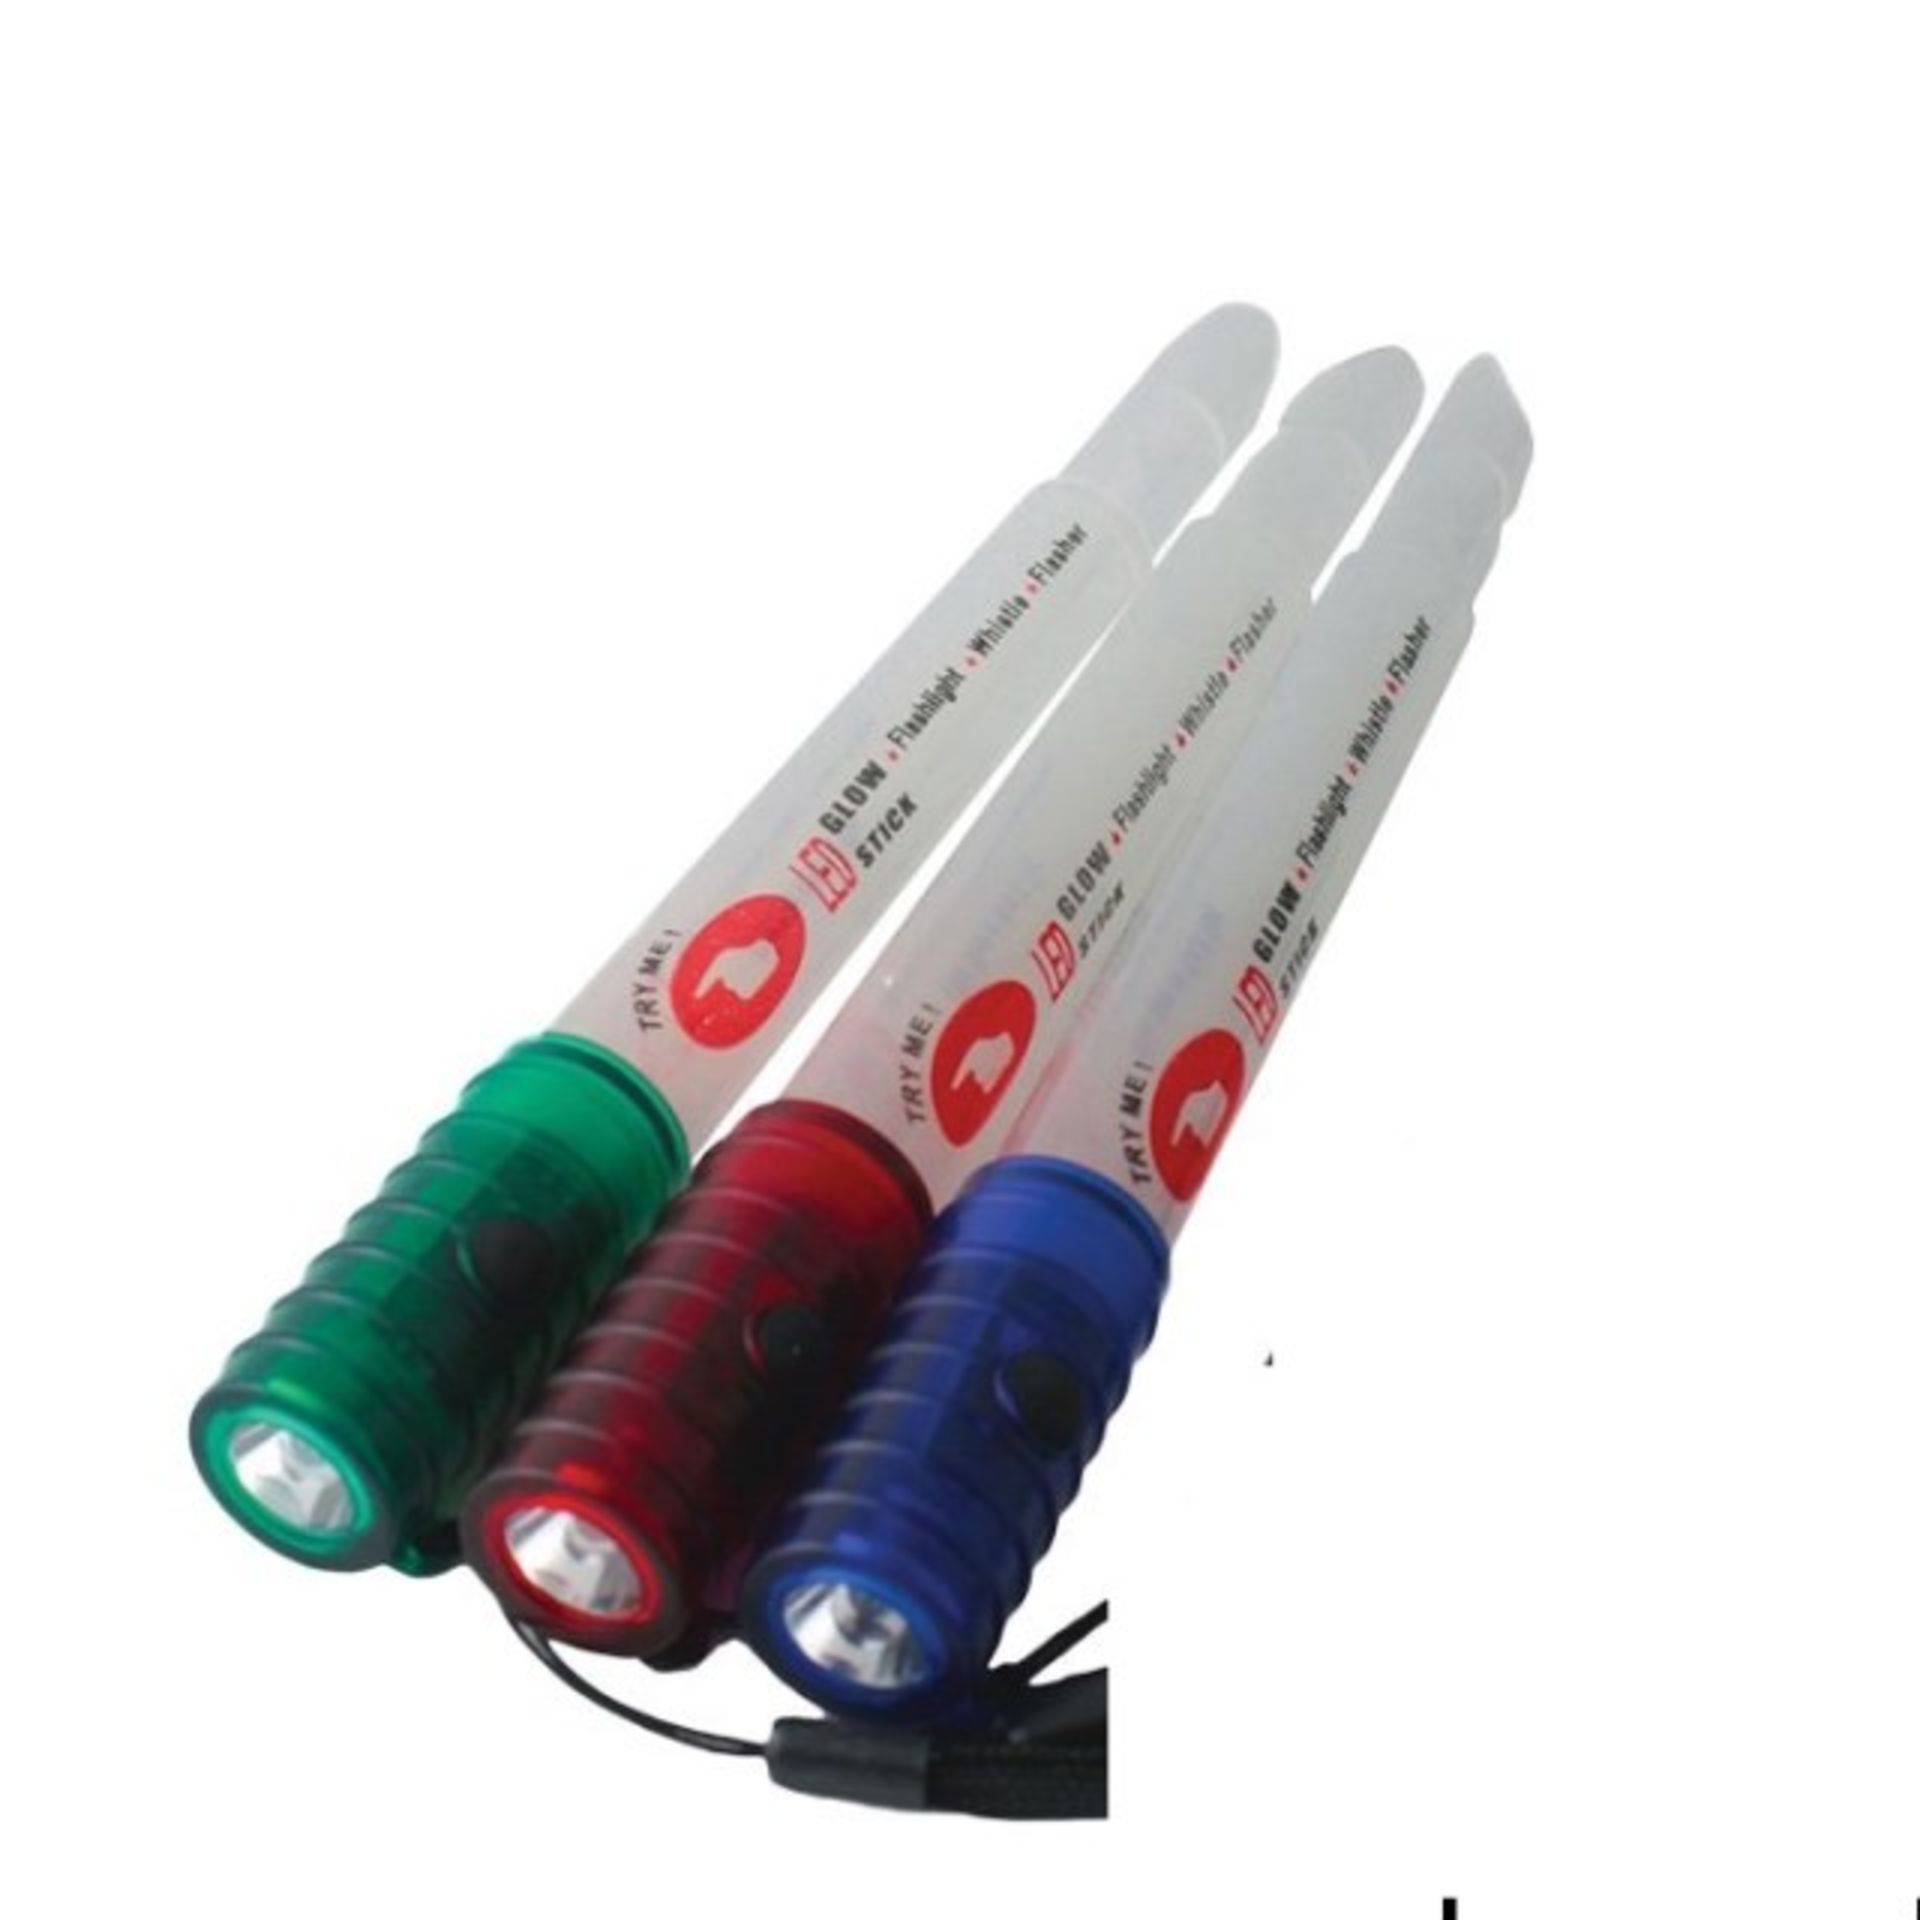 + VAT Brand New Three LED Glowstick Torches With Emergency Whistle and 3 Light Settings Includes